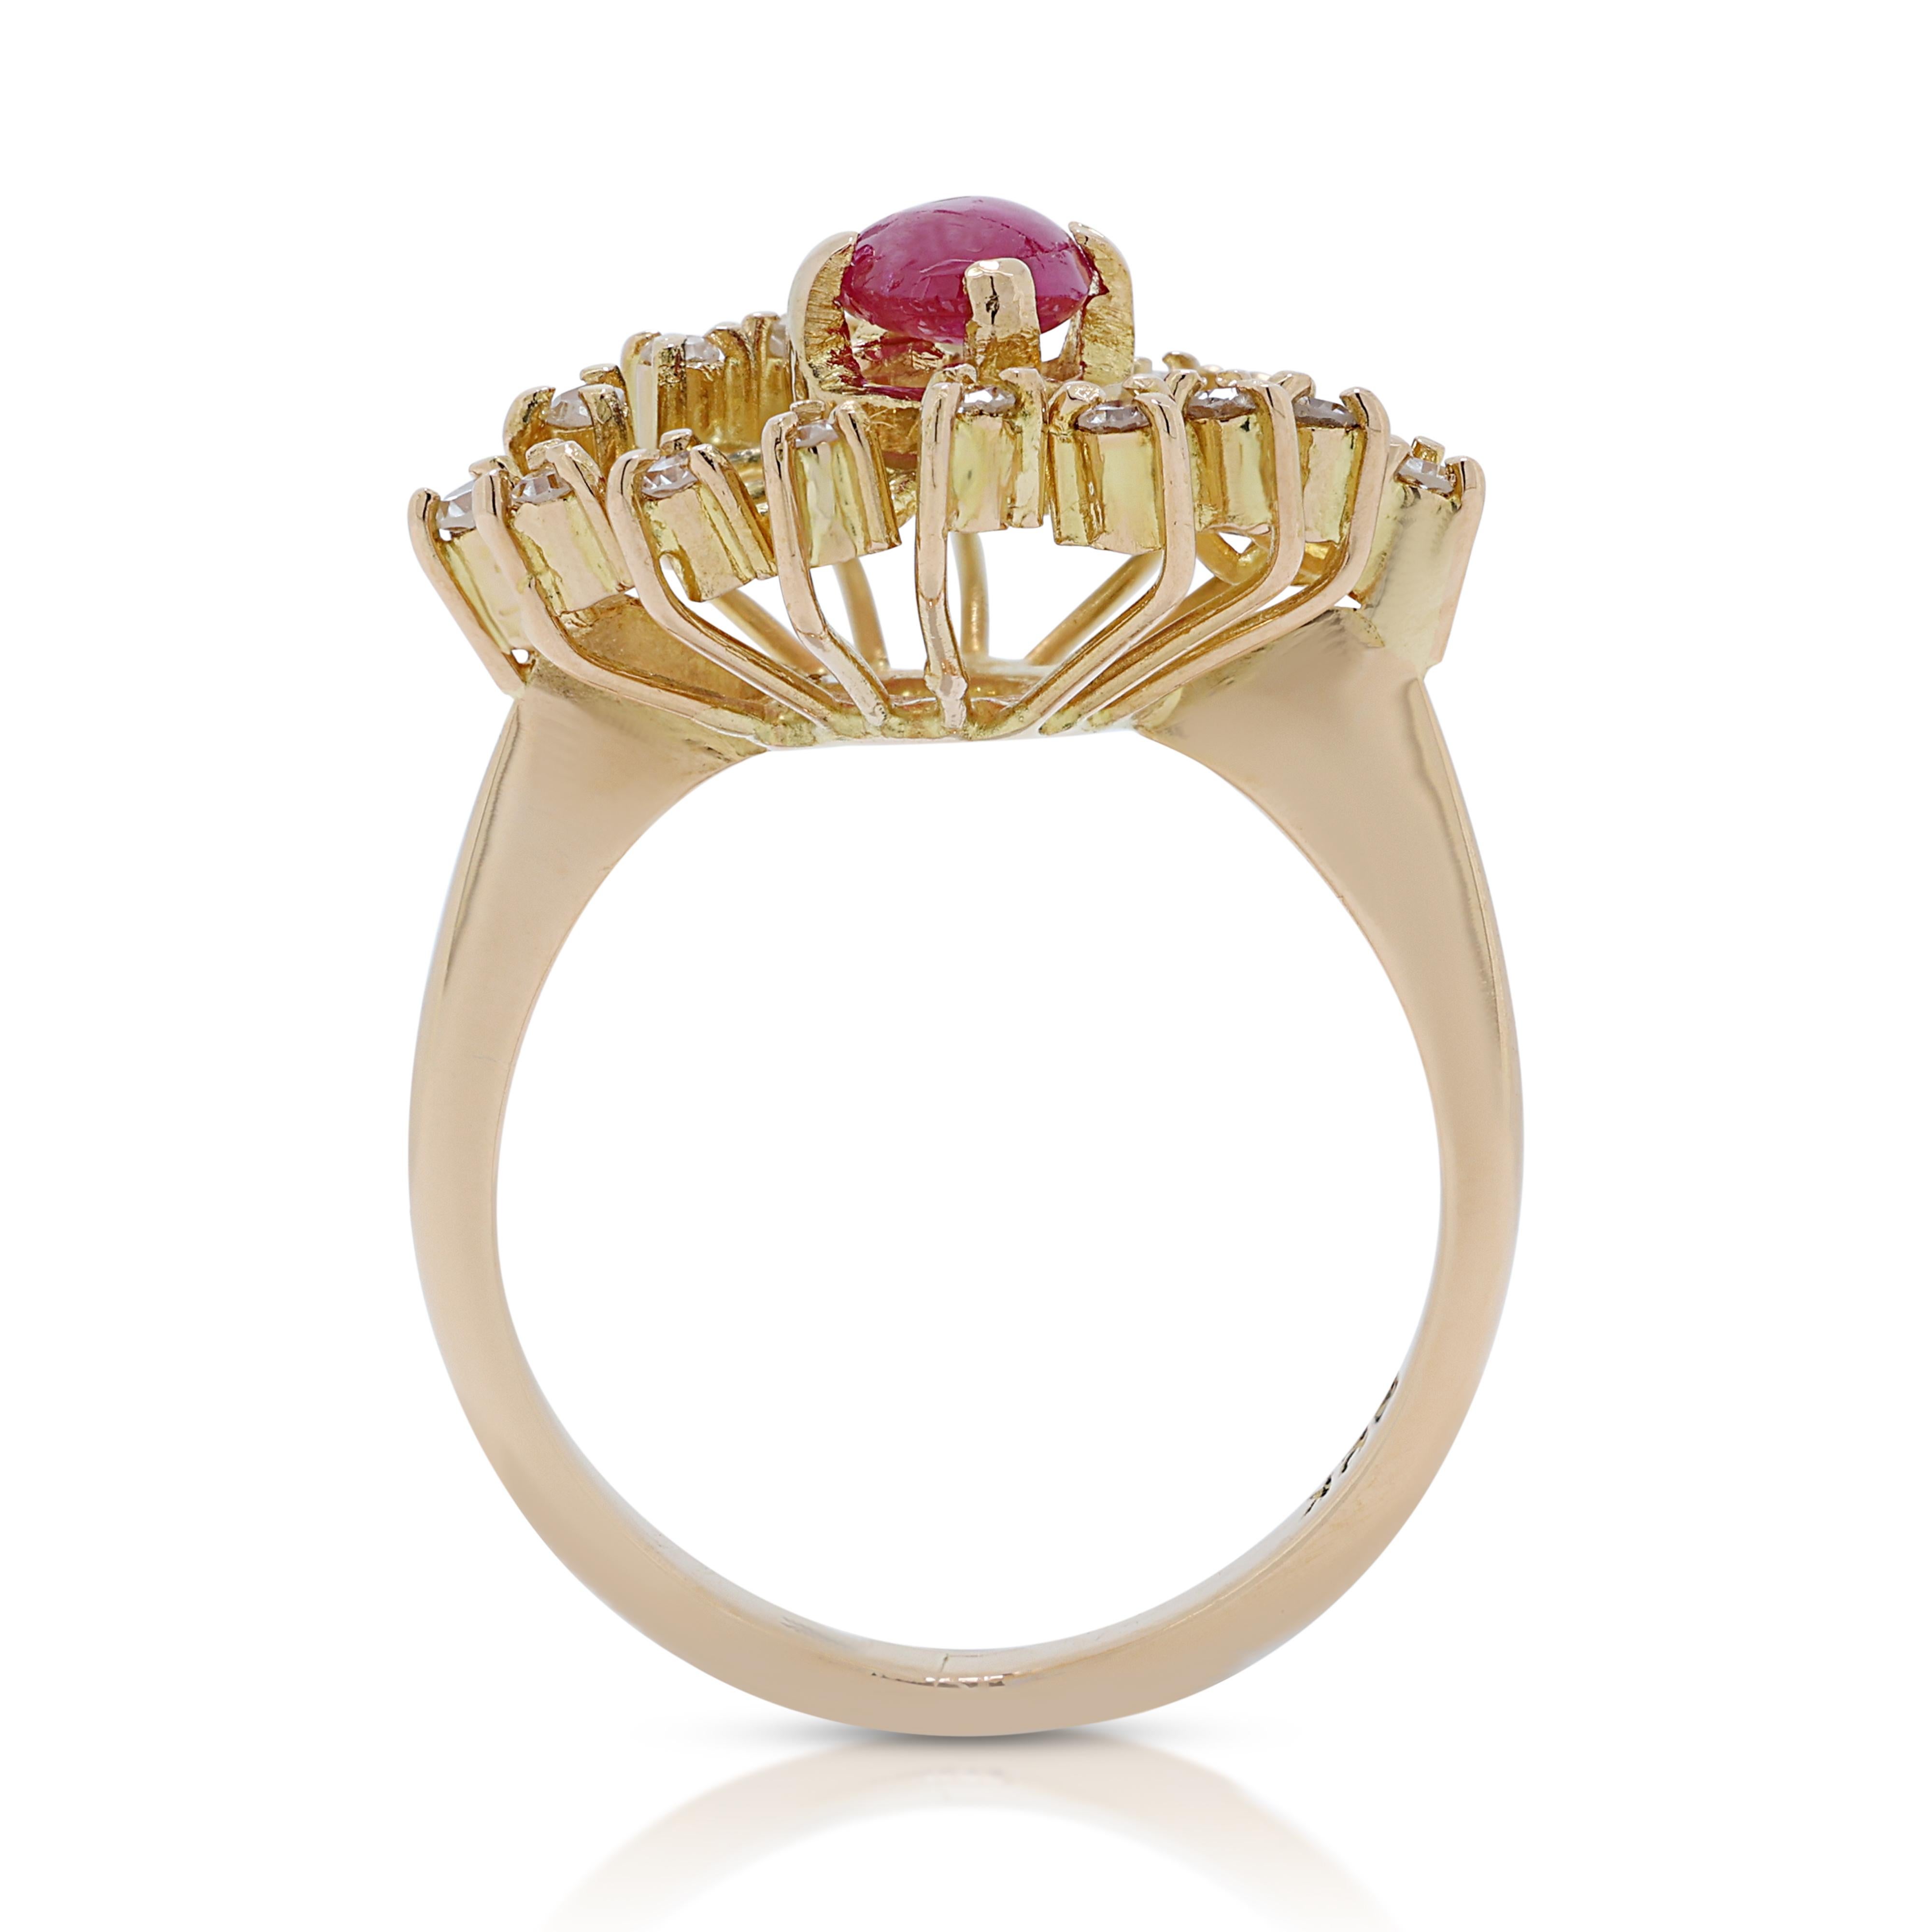 Captivating 0.45ct Tourmaline Cluster Ring in 22K Yellow Gold with Diamonds For Sale 2